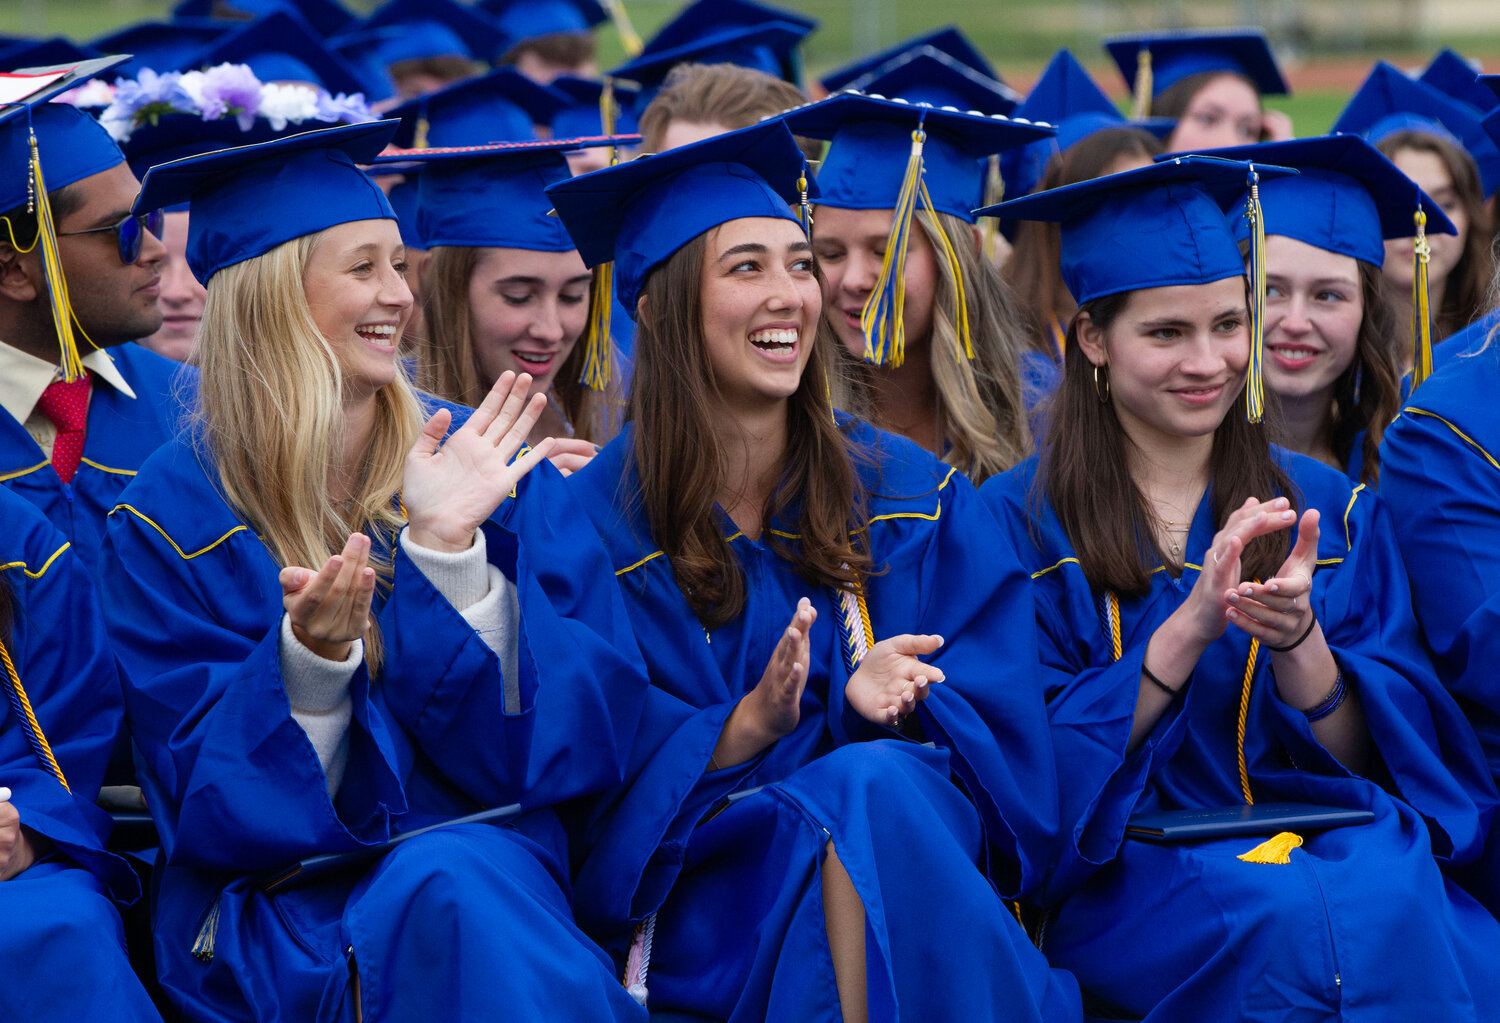 Perry Davis, Sonya Pareek and Anna Saal (from left to right) applaud during the graduation ceremony.